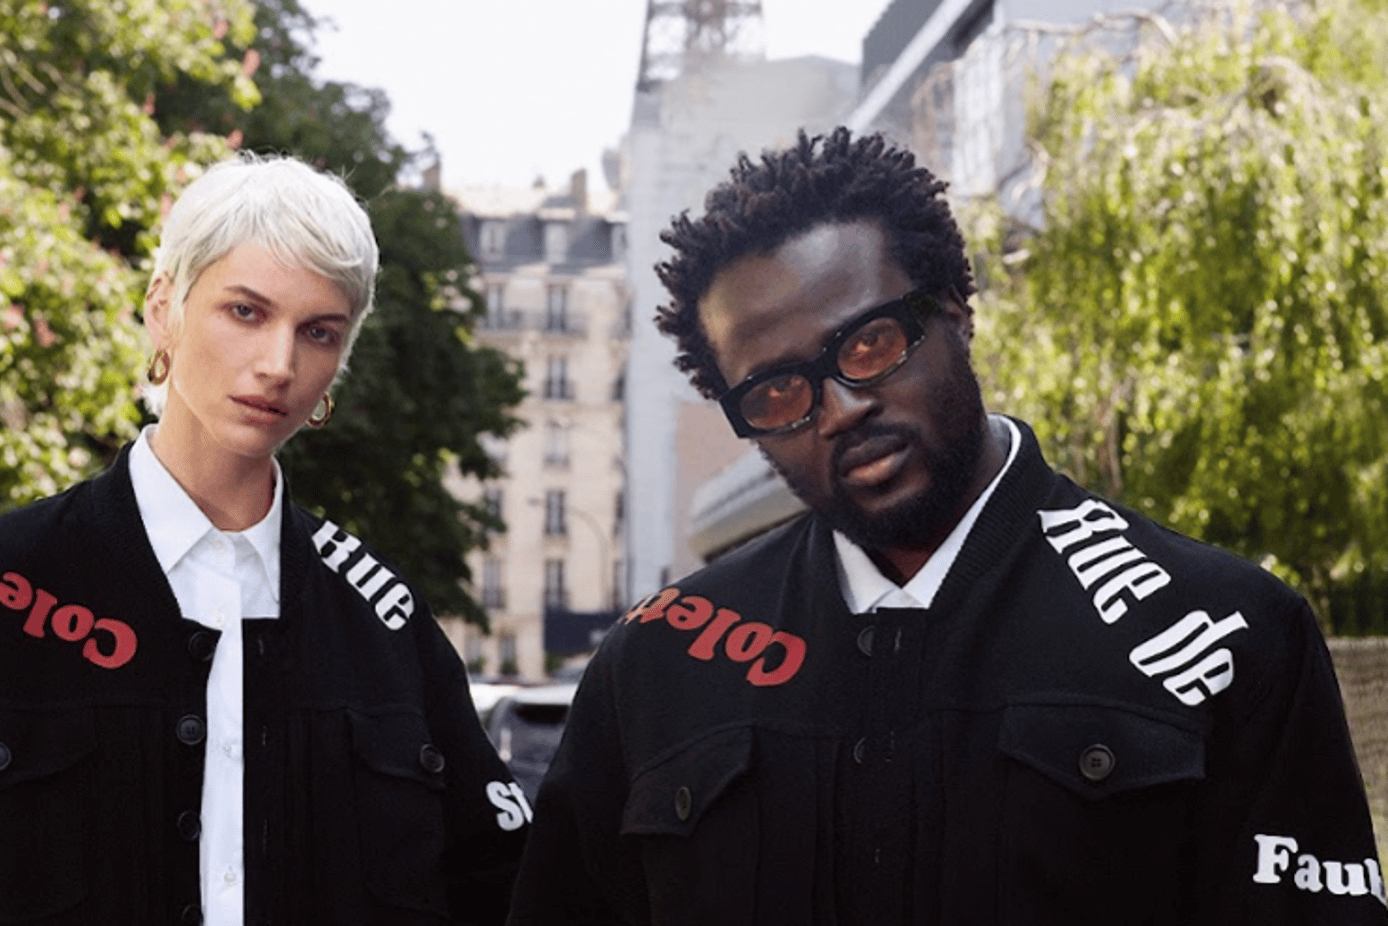 24S collaborates with Tokyo James to launch a designer capsule collection